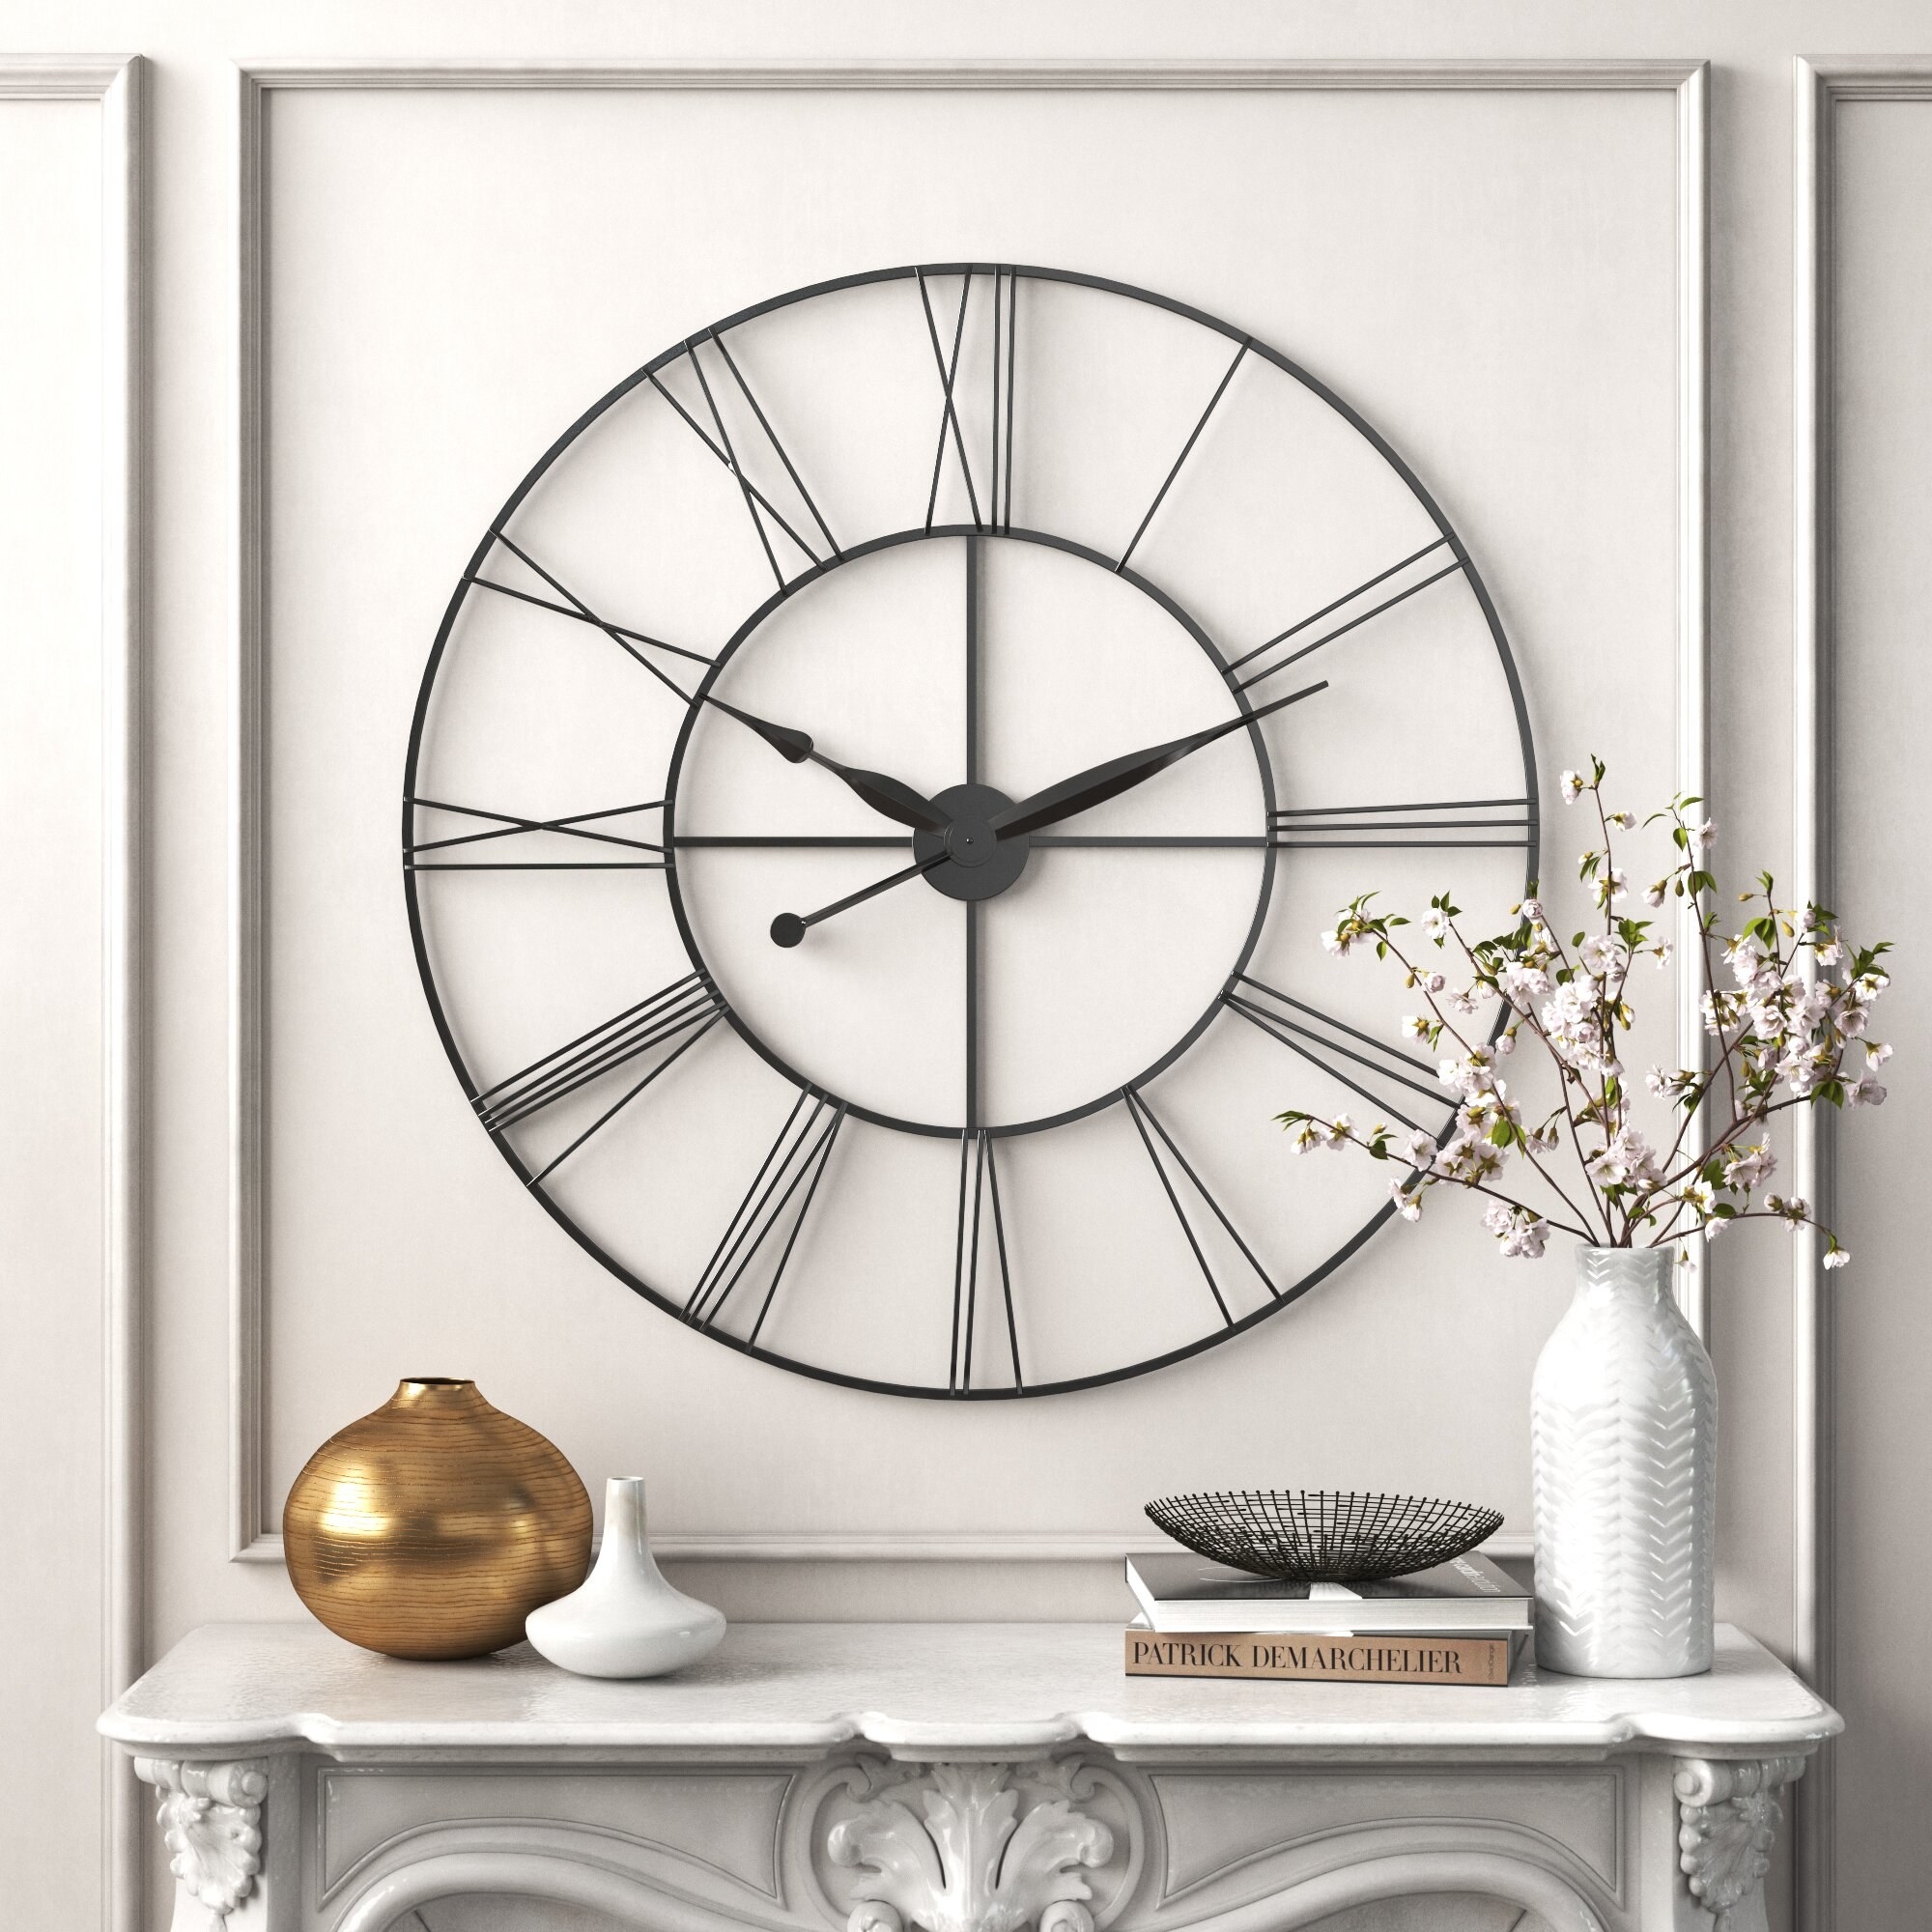 Oversized wall clock in entry way